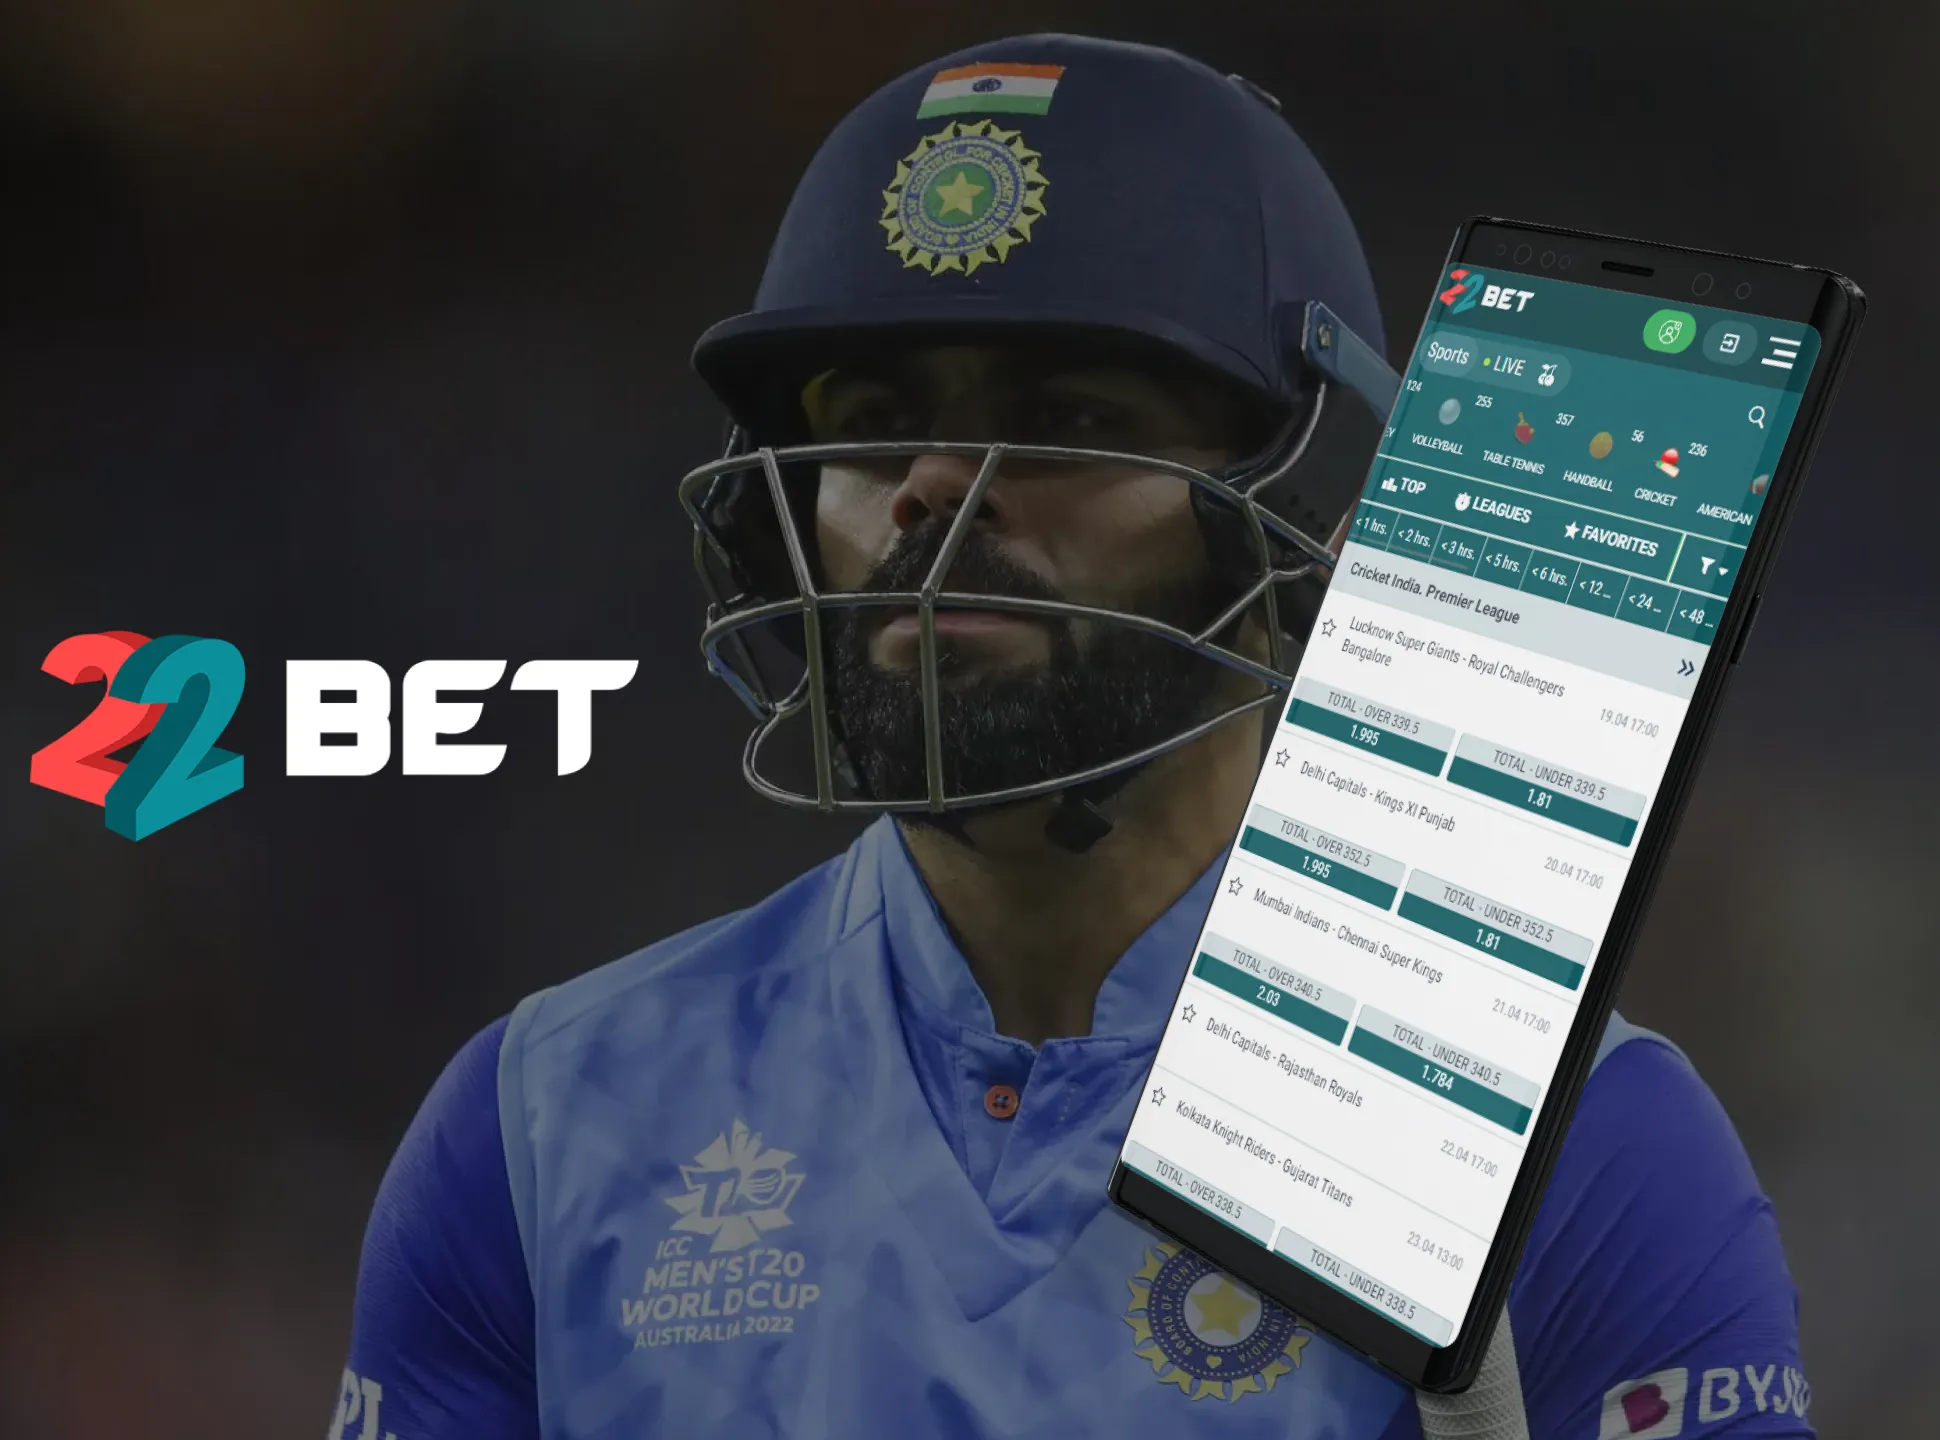 Try betting on cricket at 22Bet.